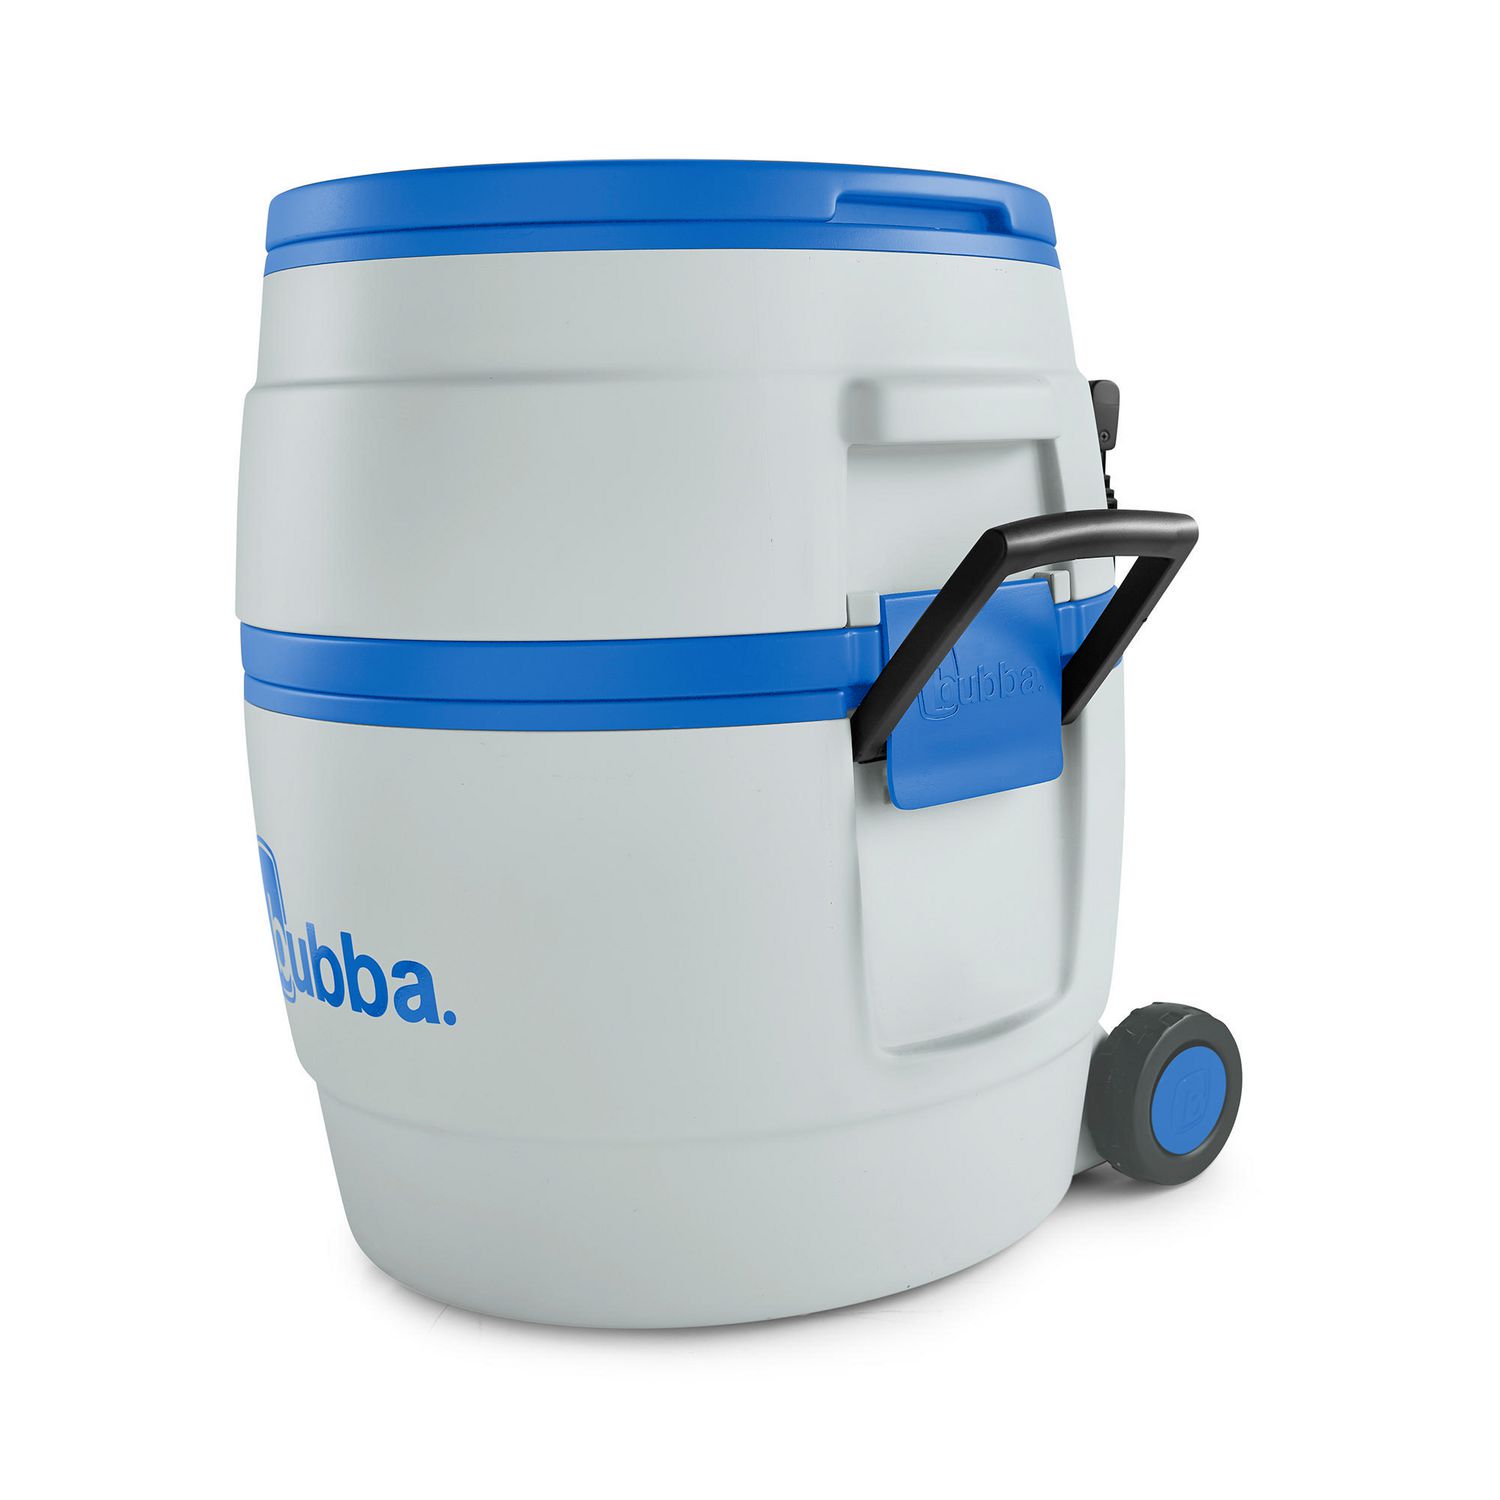 bubba cooler 2 In 1